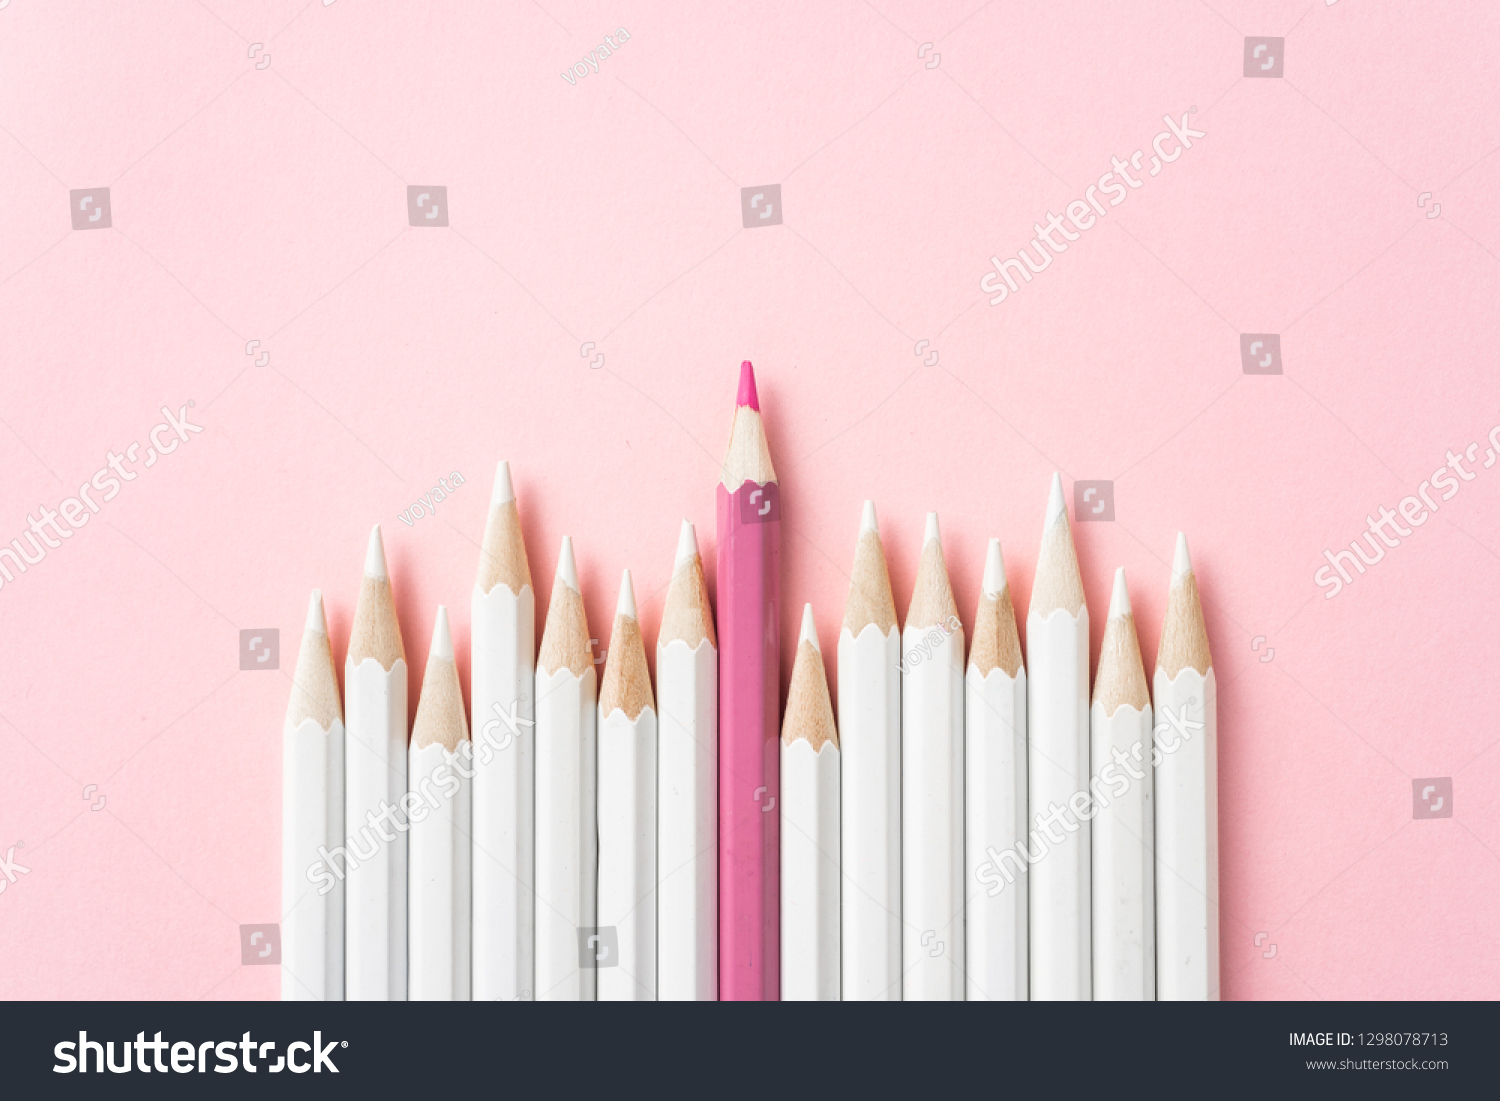 Business and design concept - lot of white pencils and one color pencil on pink paper background. It's symbol of leadership, teamwork, success and unique. #1298078713